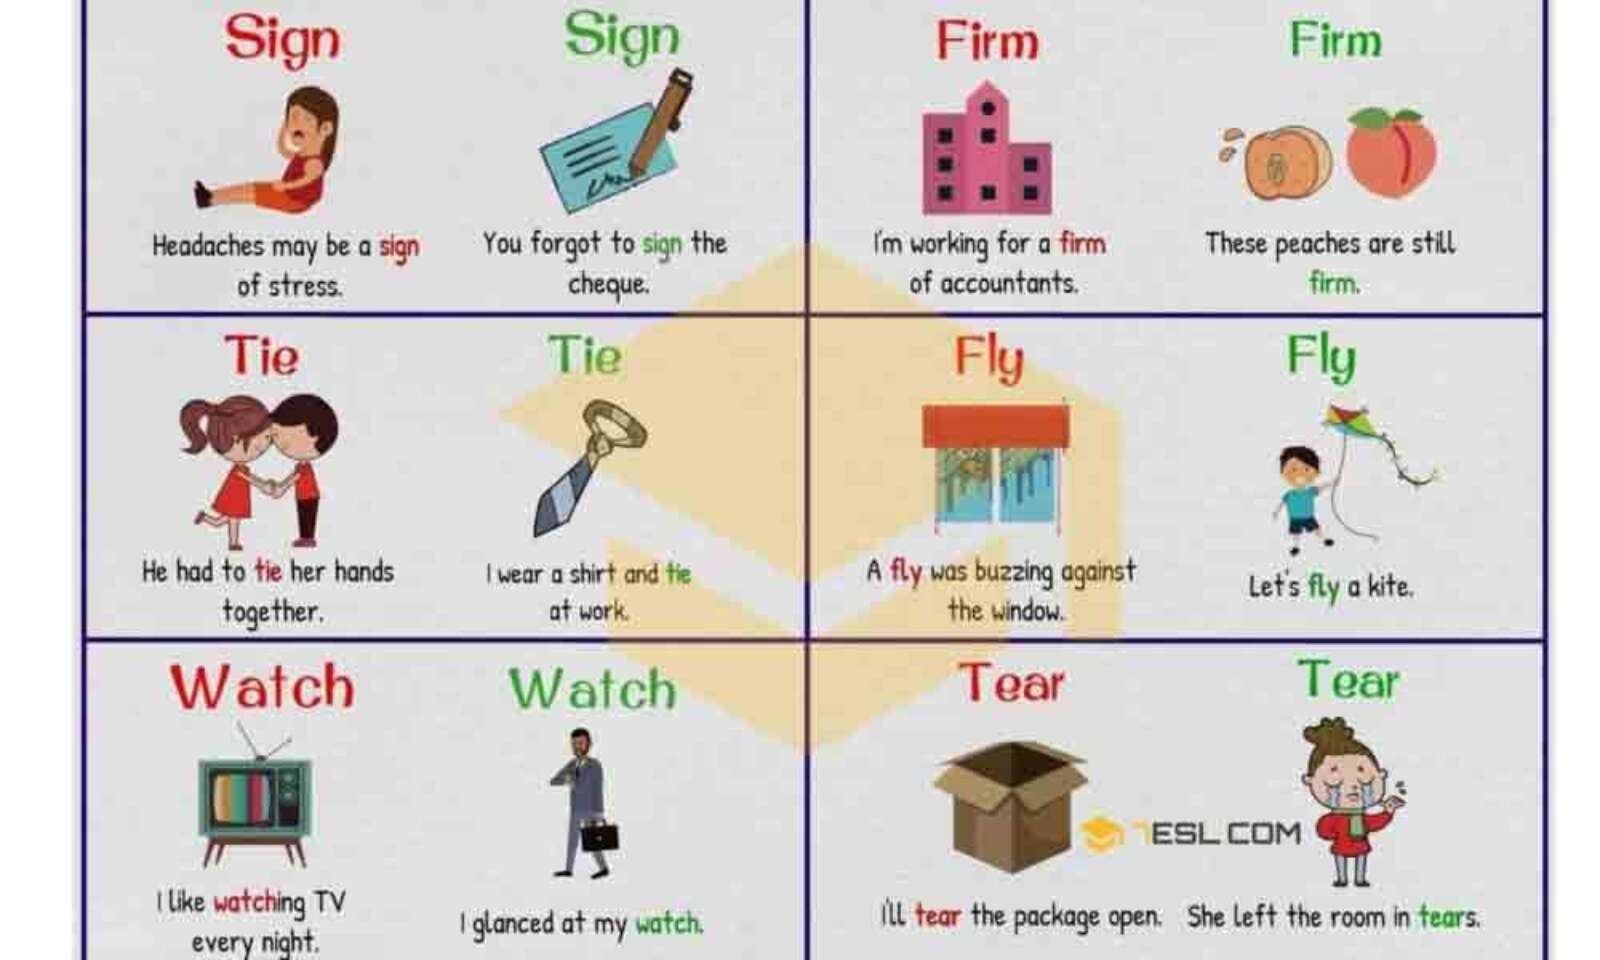 Homonyms – Same spelling, different meaning